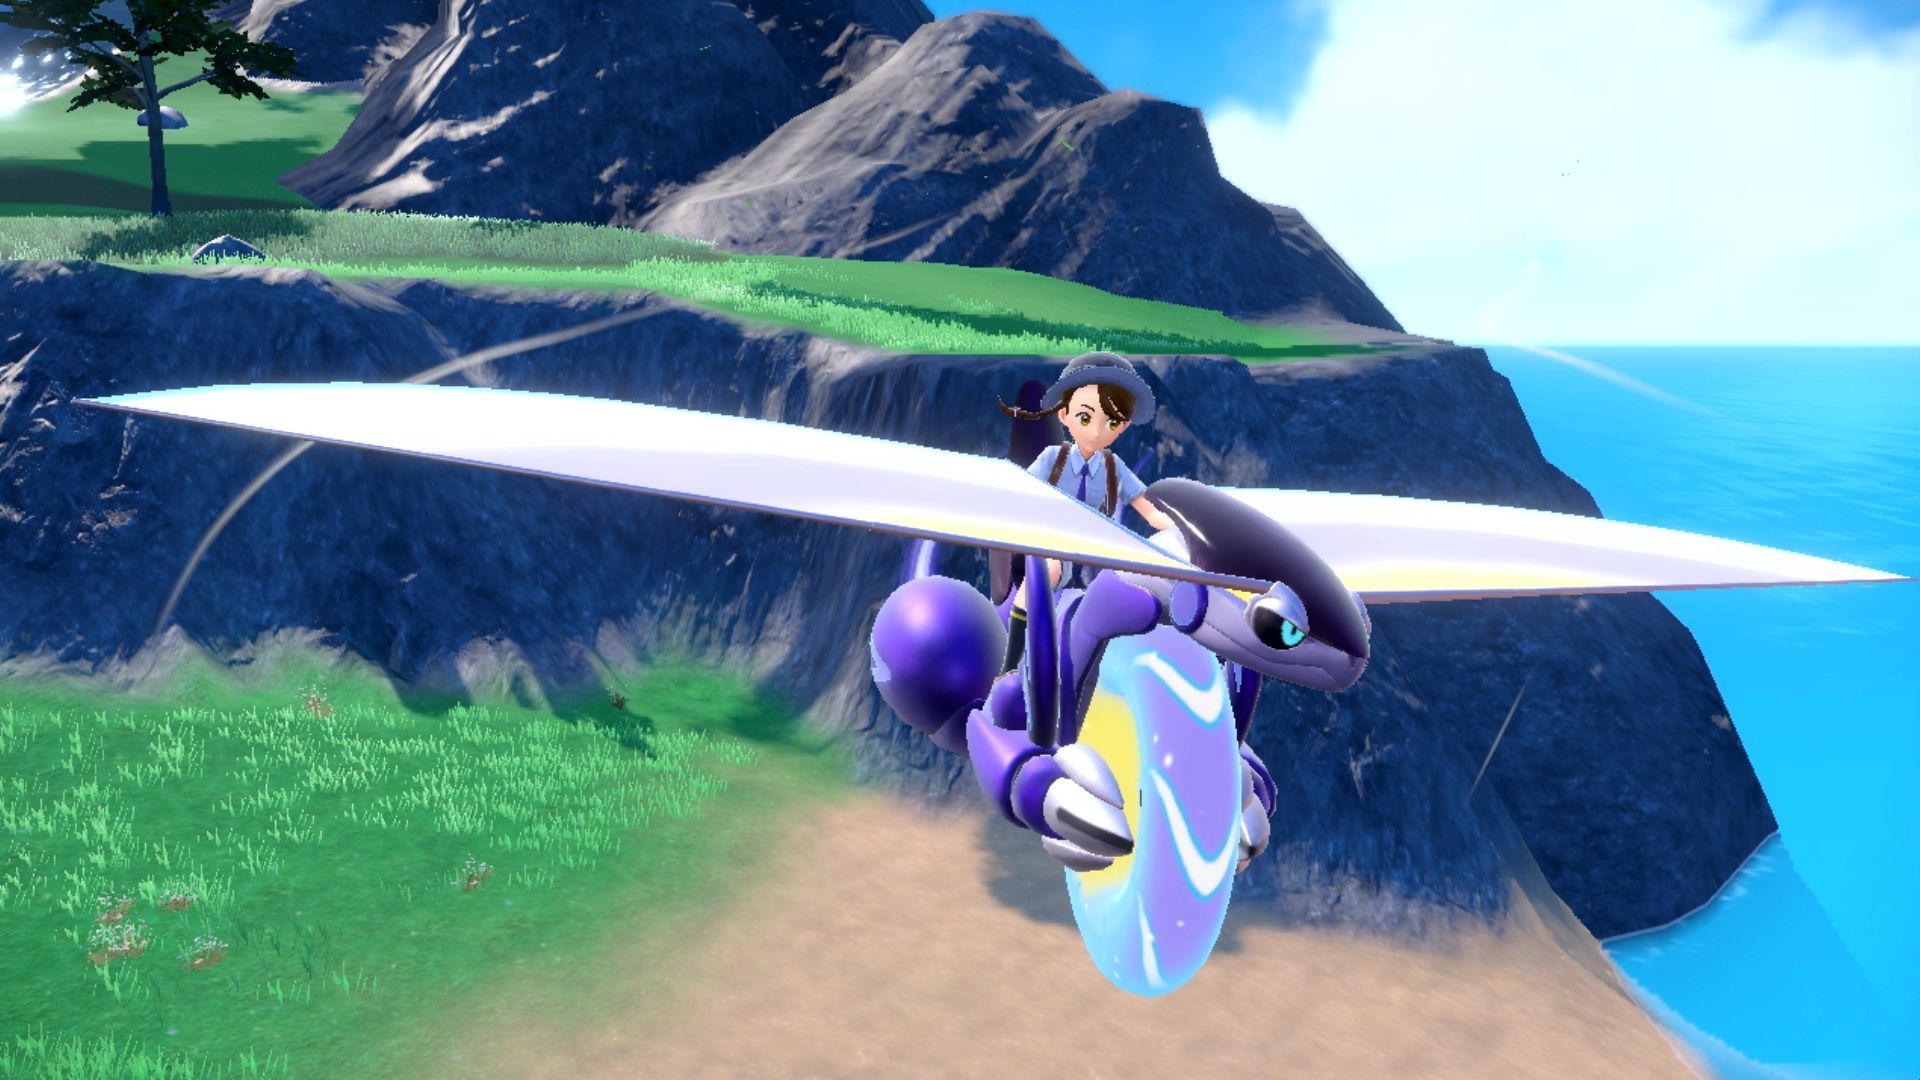 loving the graphics in pokemon scarlet and violet : r/gaming